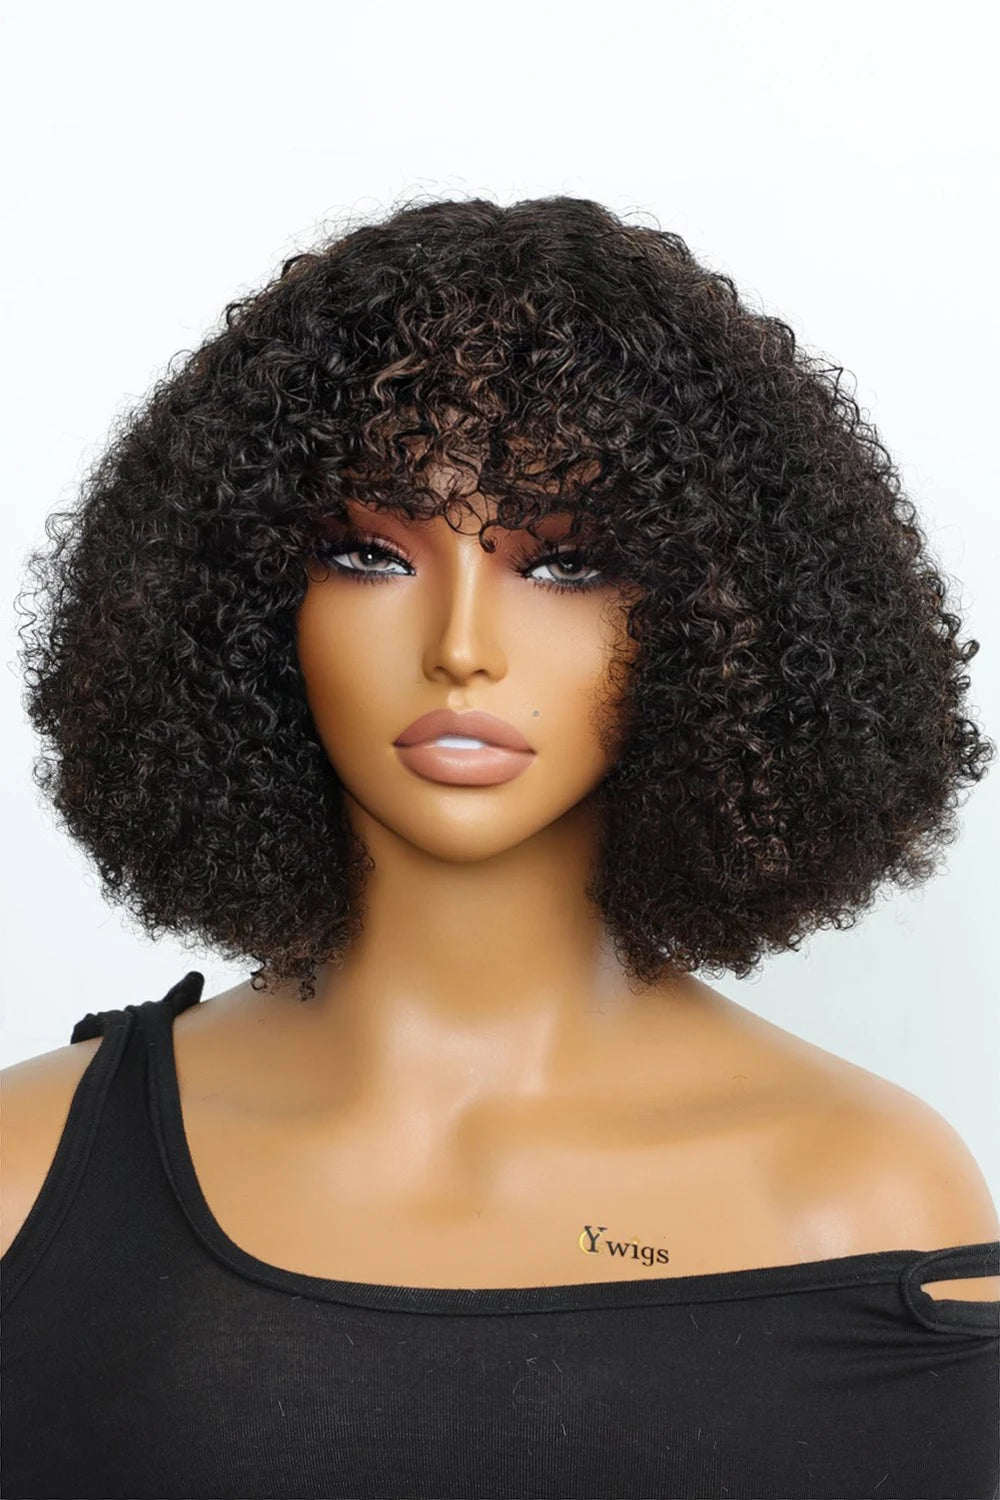 no-glue-wigs-with-lace-front-top-and-bangs-highlight-brown-curly-3